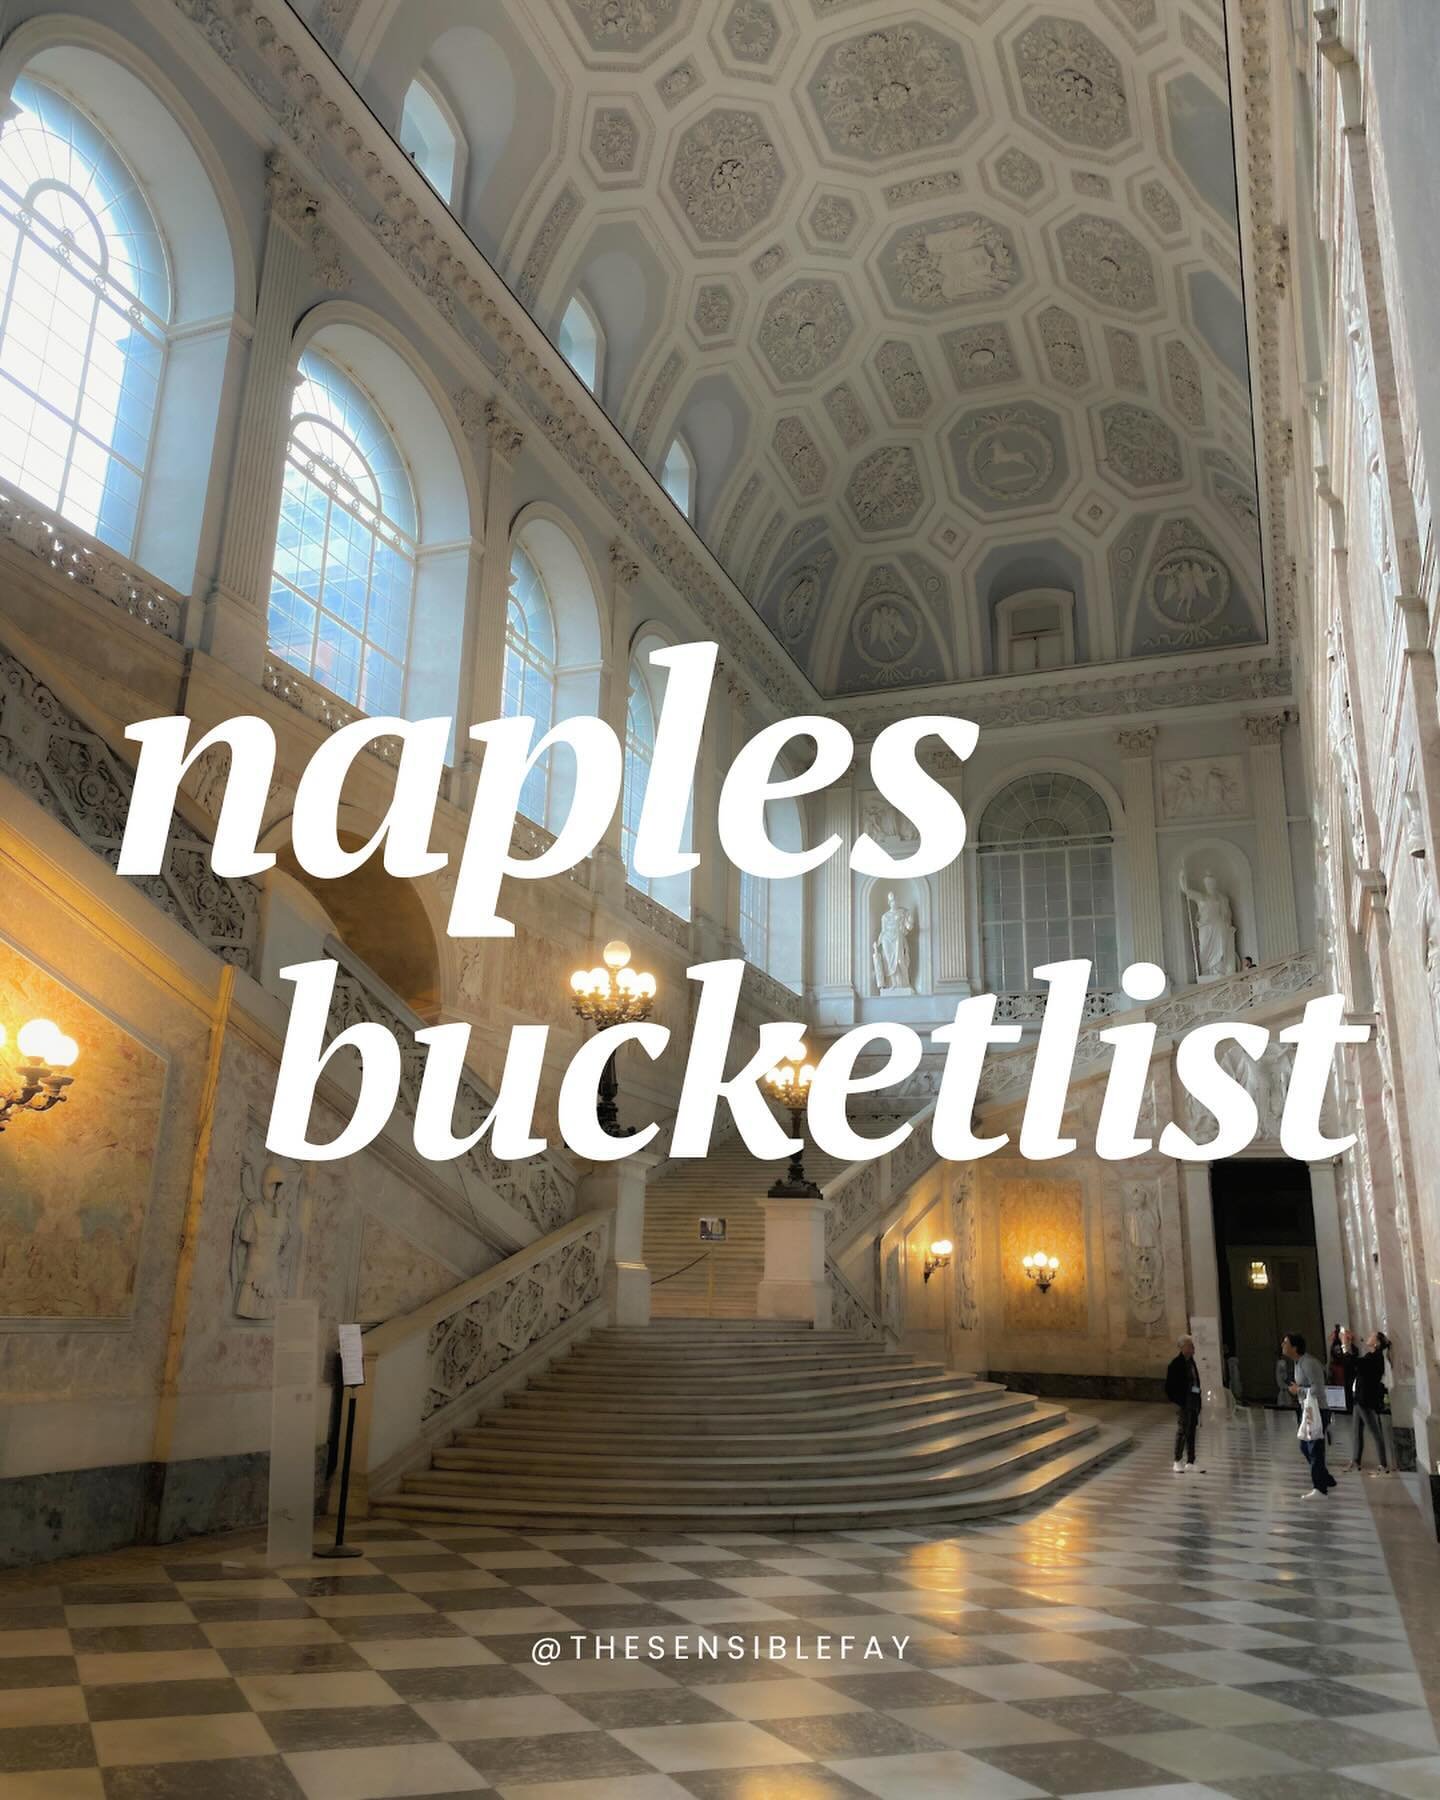 Visiting Naples, Italy for the first time? Add these things to your bucket-list!

+ start your day off with a coffee and sfogliatella at gran caffe gambrinus

+ spend your morning people watching at piazza del plebiscito

+ take a day trip to pompeii